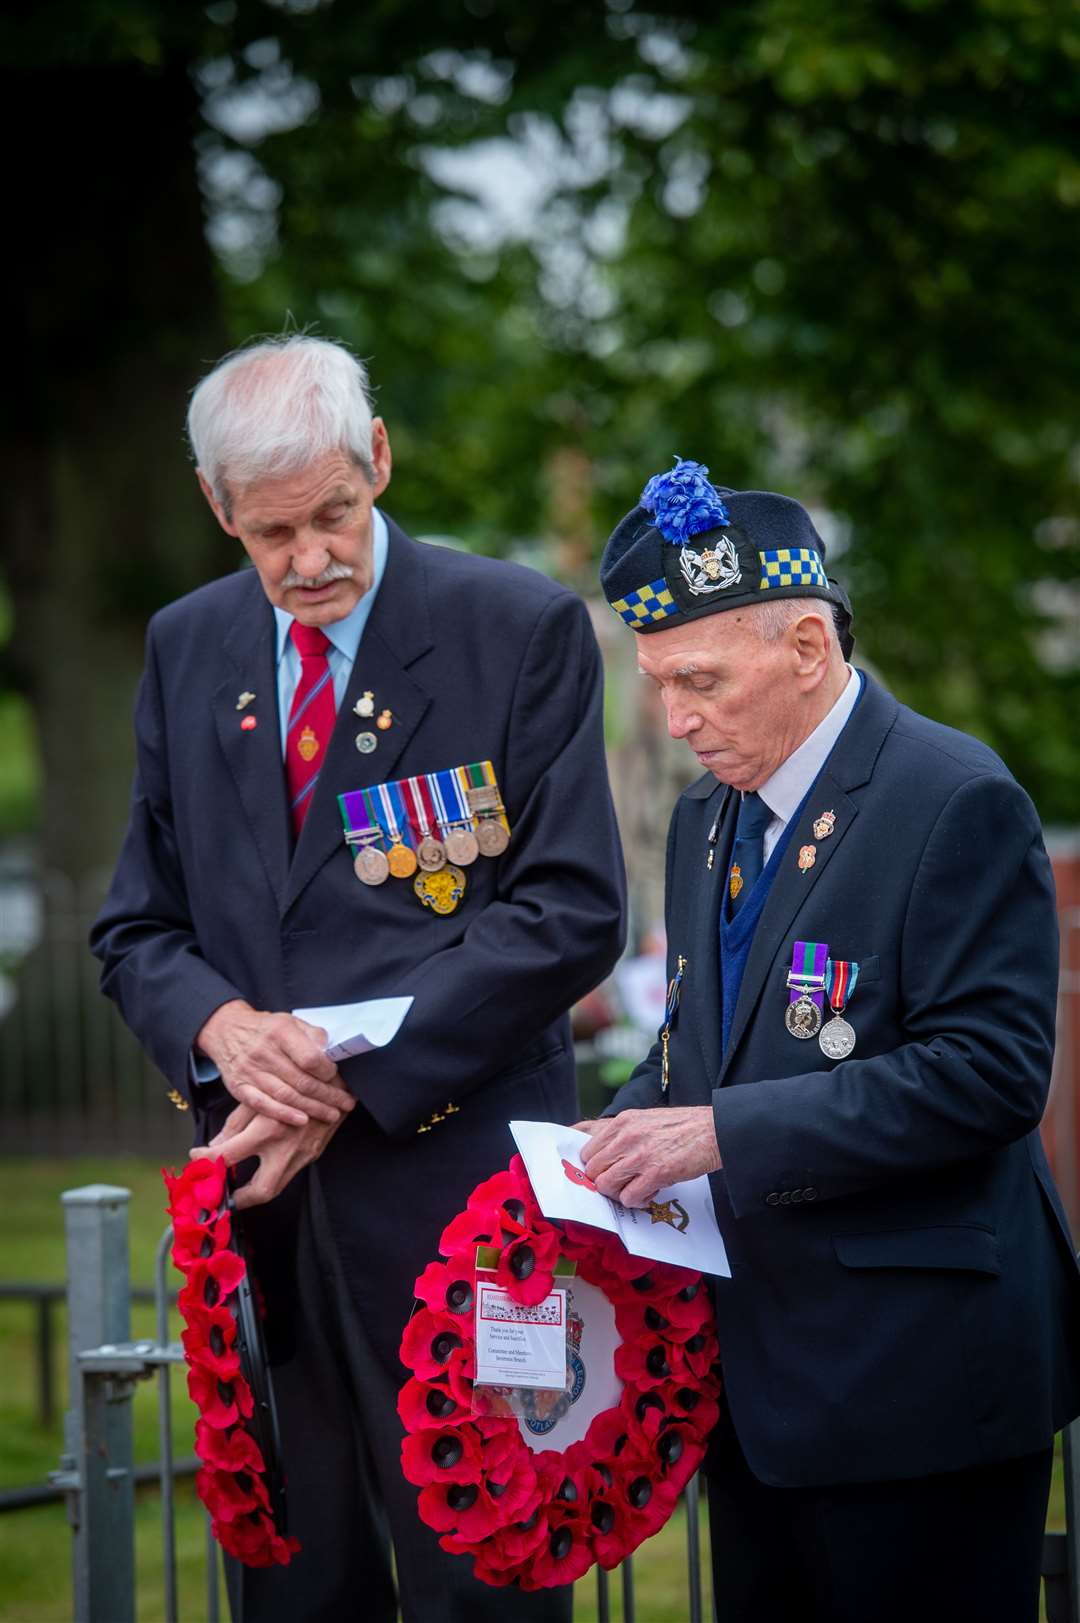 75th anniversary of VJ Day, Cavell Gardens war memorial, Inverness.